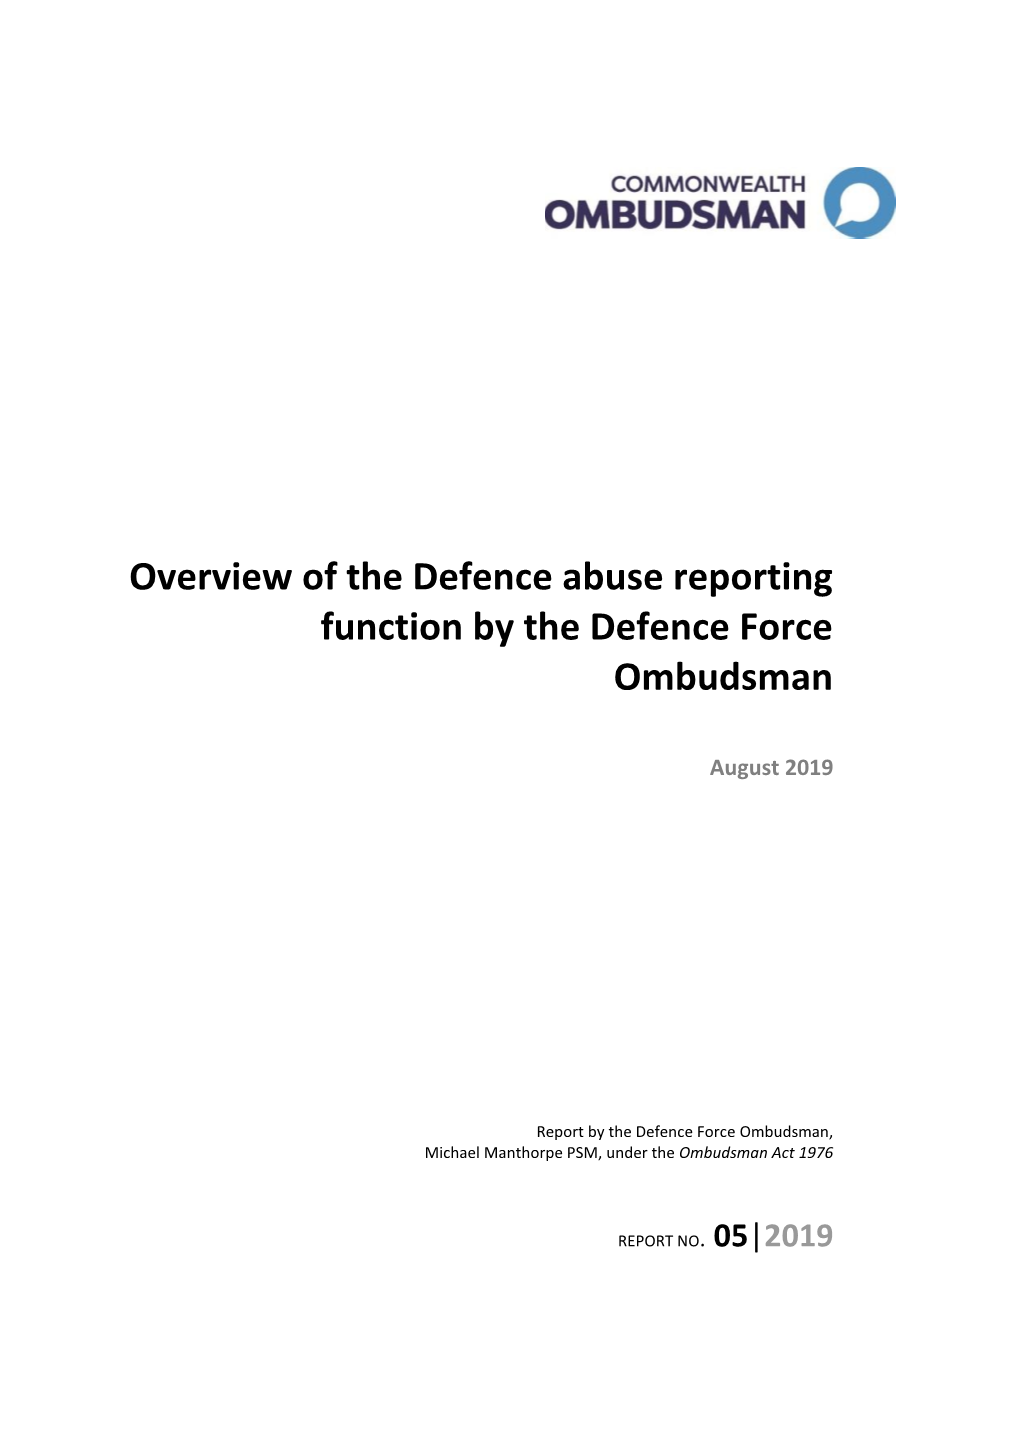 Overview of the Defence Abuse Reporting Function, June 2019